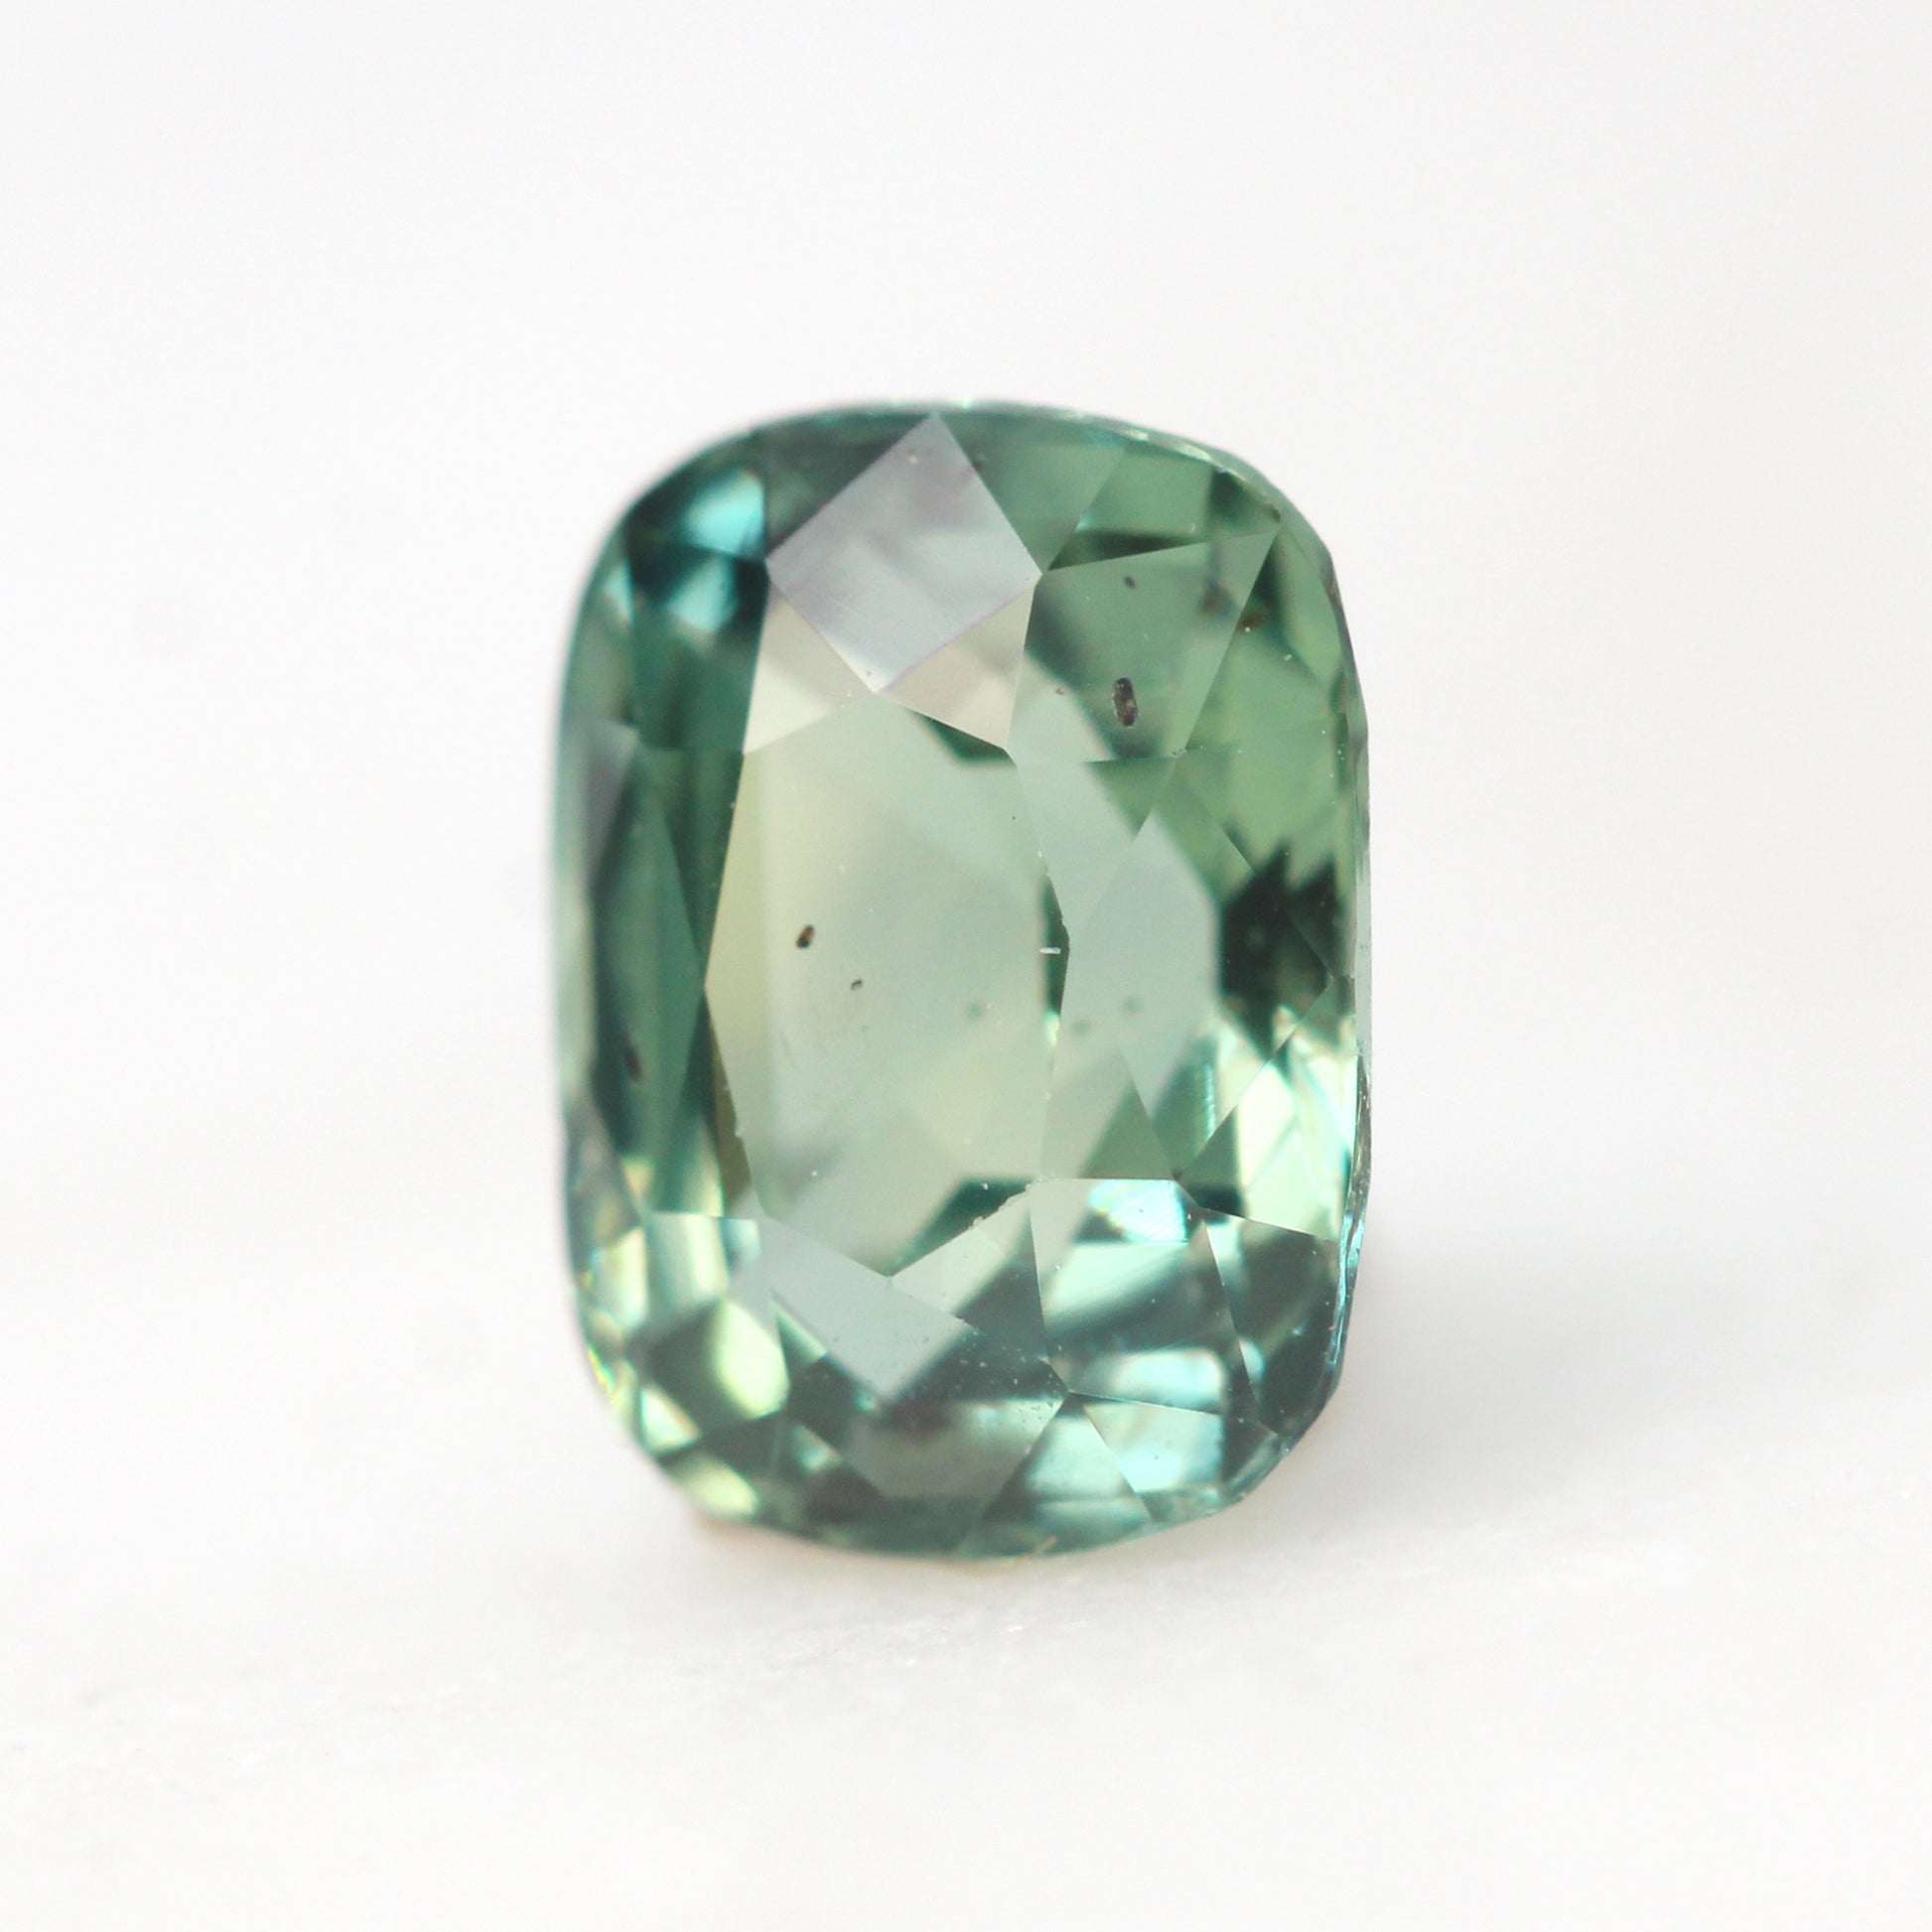 1.09 Carat Light Teal Green Cushion Cut Sapphire for Custom Work - Inventory Code TGCS109 - Midwinter Co. Alternative Bridal Rings and Modern Fine Jewelry